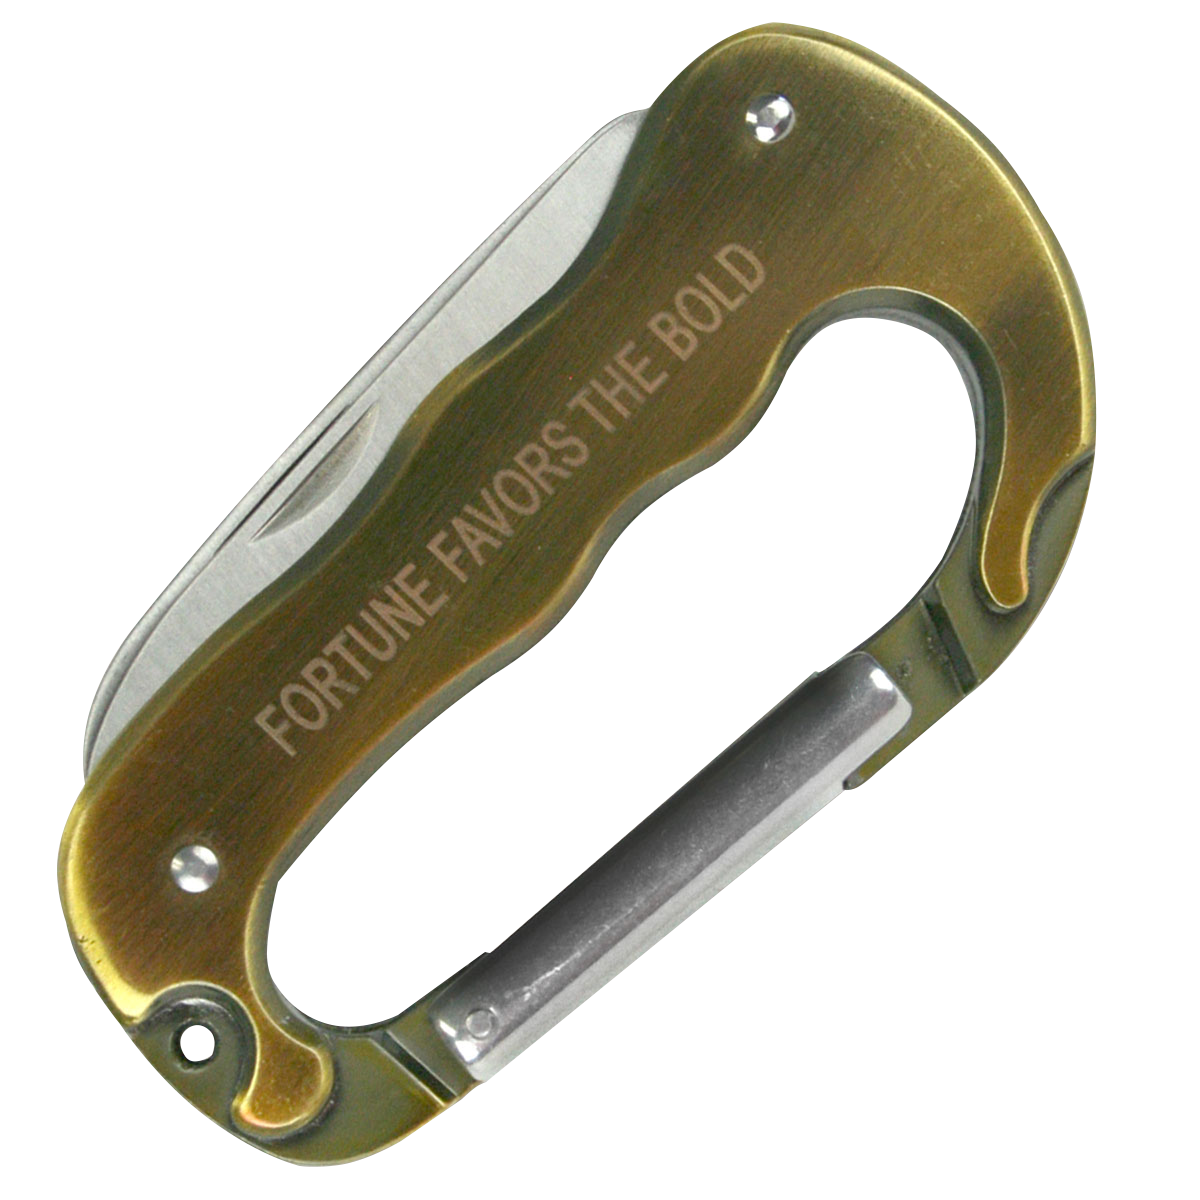 closed hitchblade carabiner with "Fortune favors the bold" engraved acrossed the side panel. Makes an excellent gift for guys or men's gift idea. Take everywhere you need it whether camping, glamping, backpacking or a just a handyman on the job. Contoured aluminum handle and stainless steel blade come together to make a lightweight and durable pocket tool 